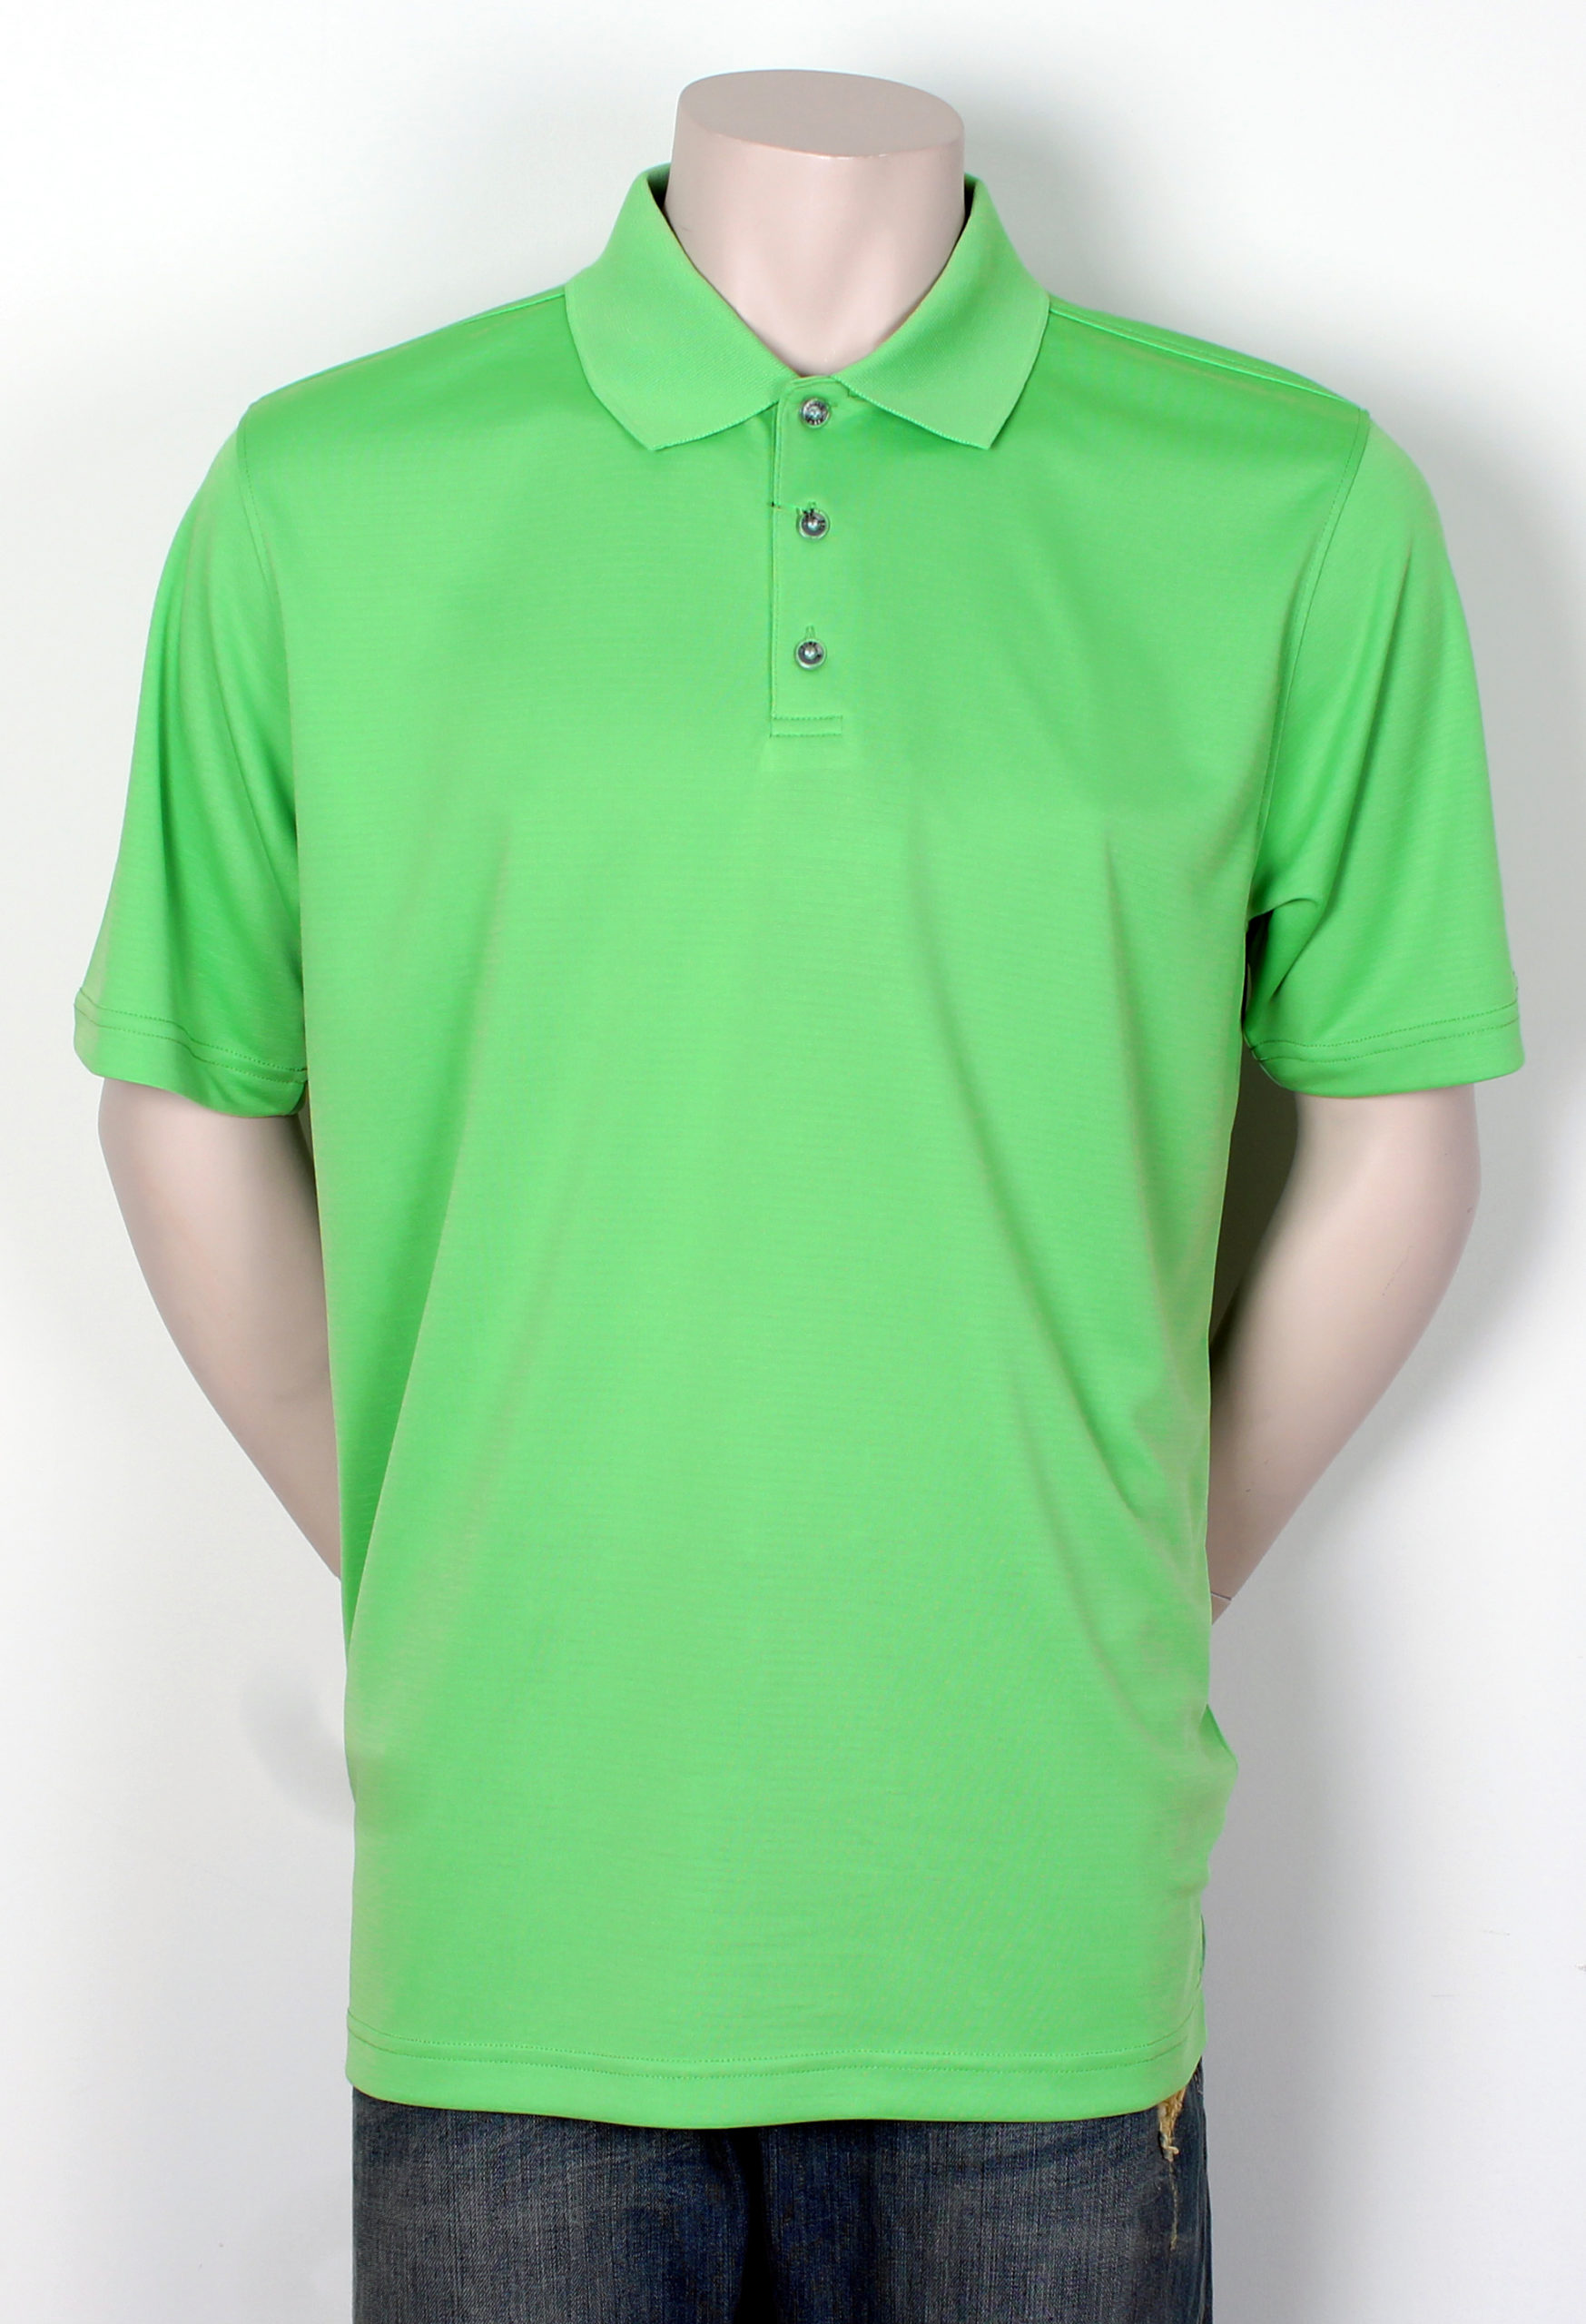 Mens Tone on Tone Stripe Polo - DKR & Company Apparel / Clothes Out Trading